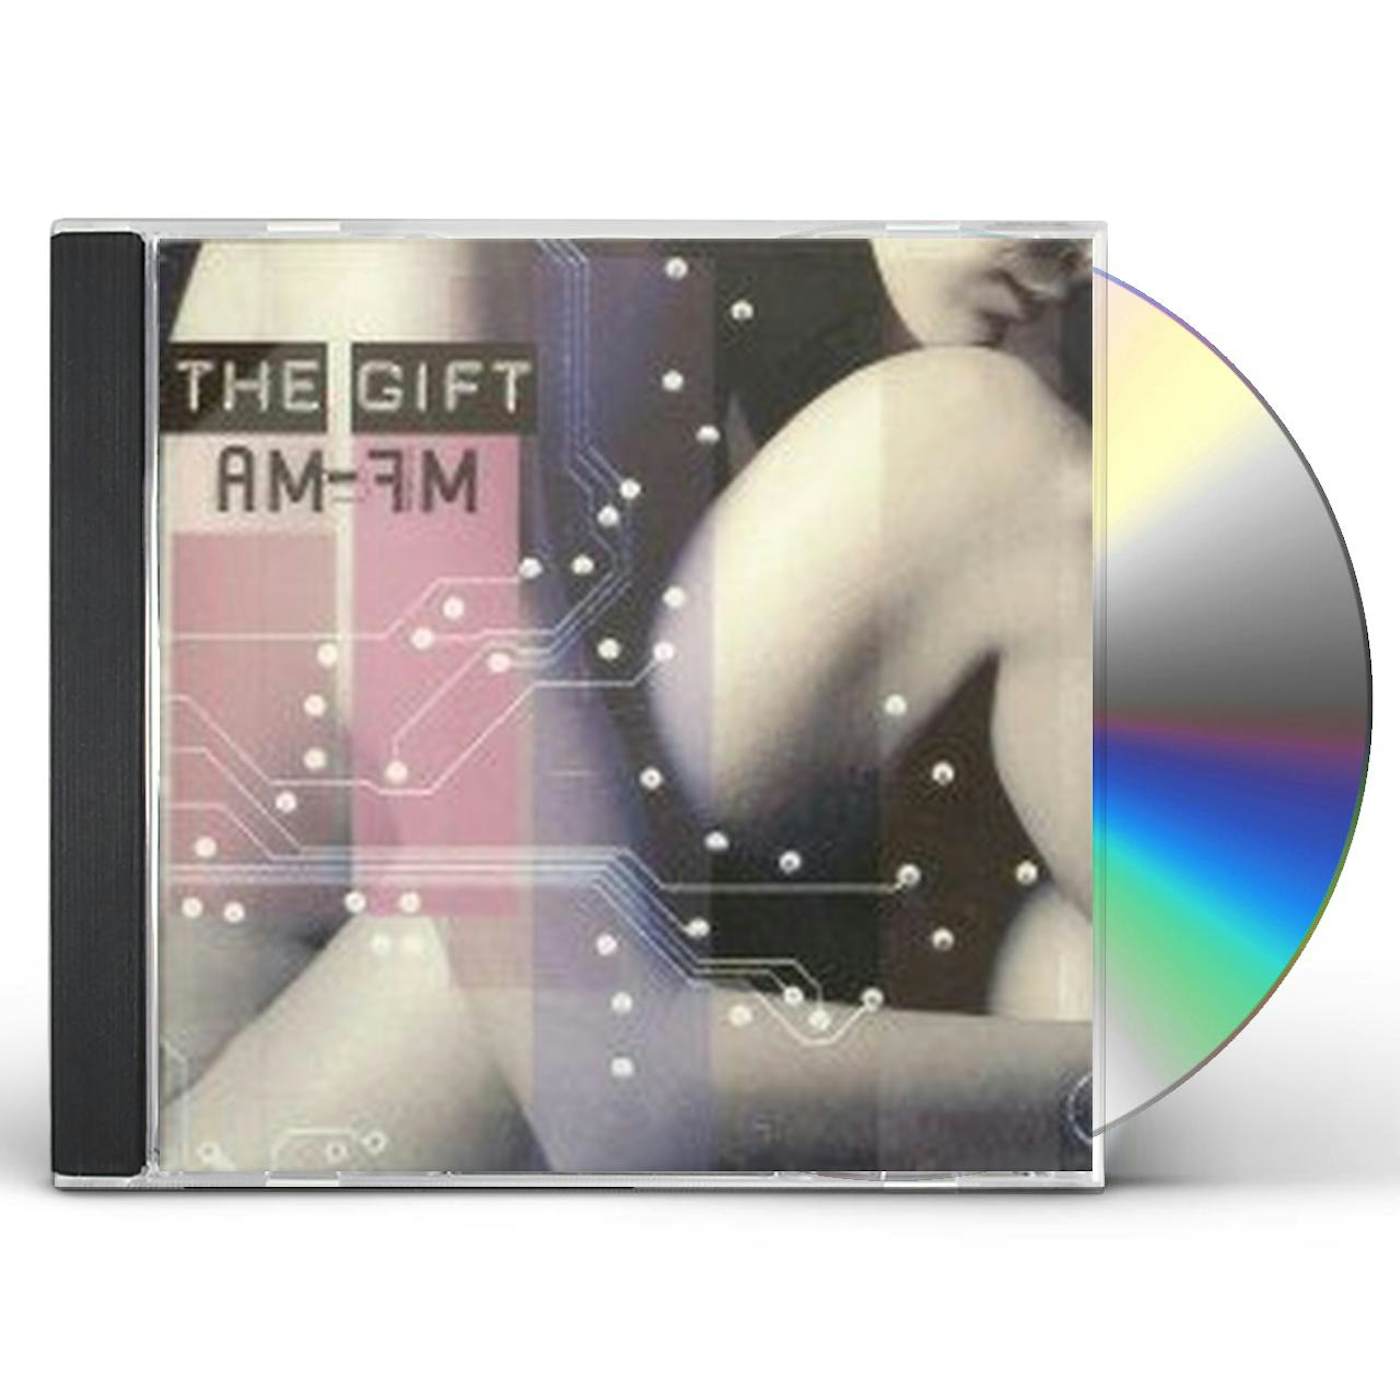 The Gift AM FM CD